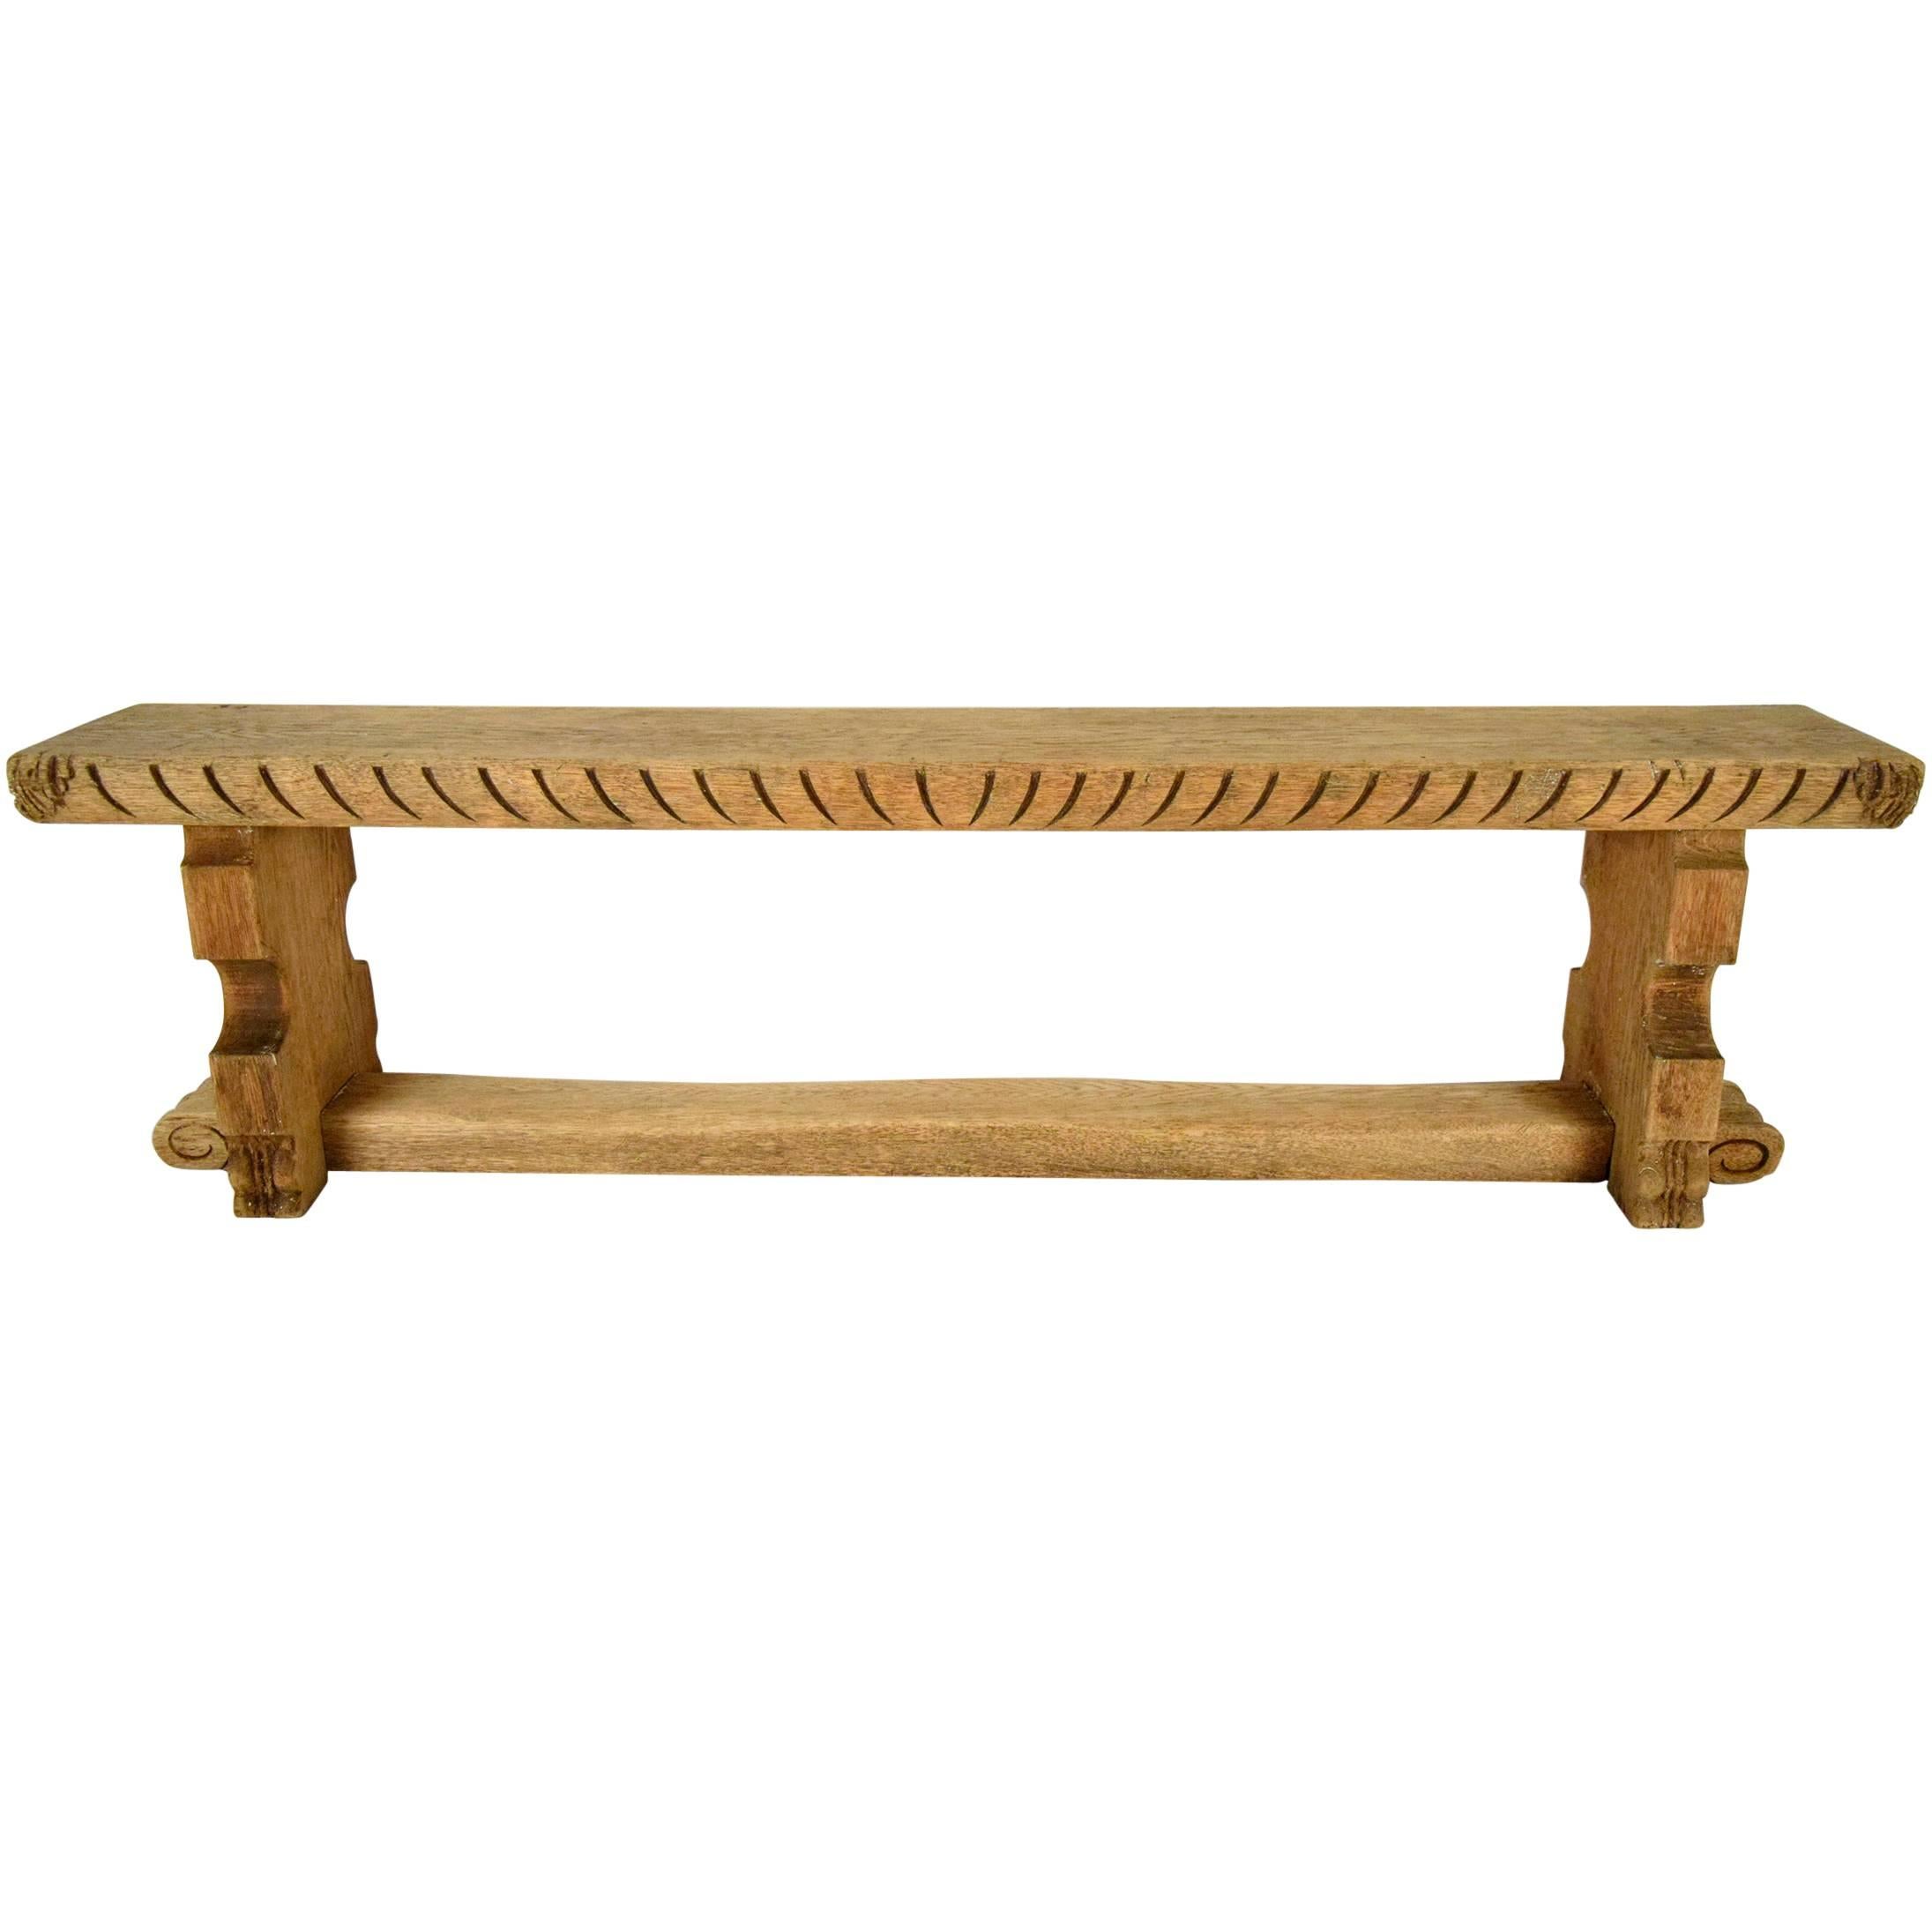 19th Century English Bleached Oak Hall Bench